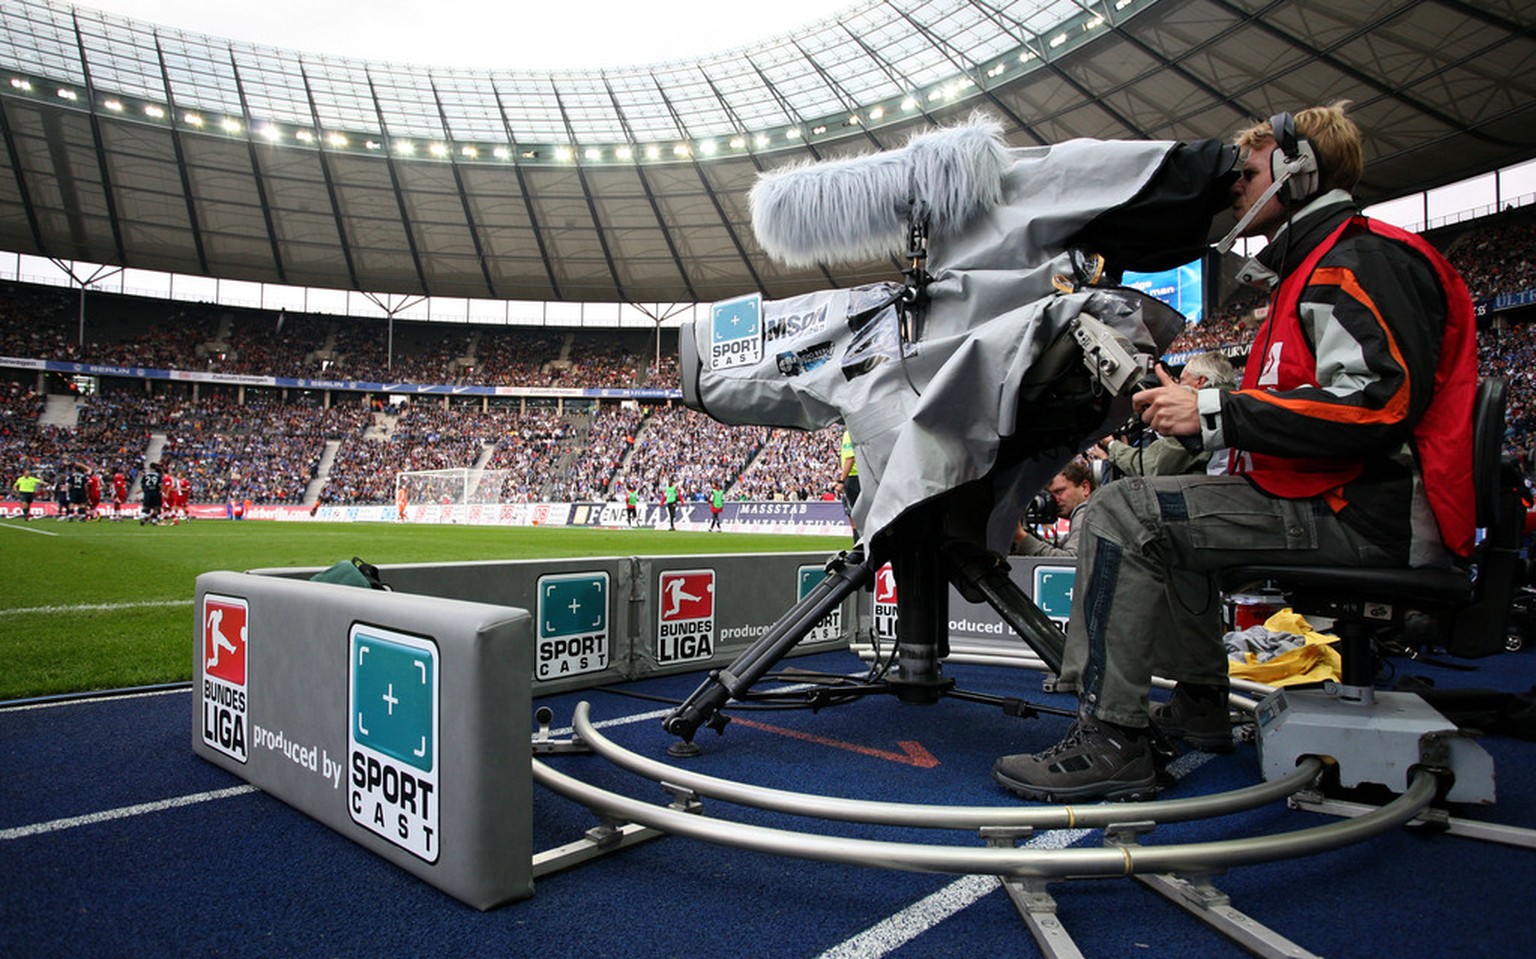 A cameraman is pictured during the German first division Bundesliga soccer match between Hertha BSC Berlin and FC Energie Cottbus in Berlin, Germany, on Saturday, Oct. 6, 2007. (AP Photo/Miguel Villag ...